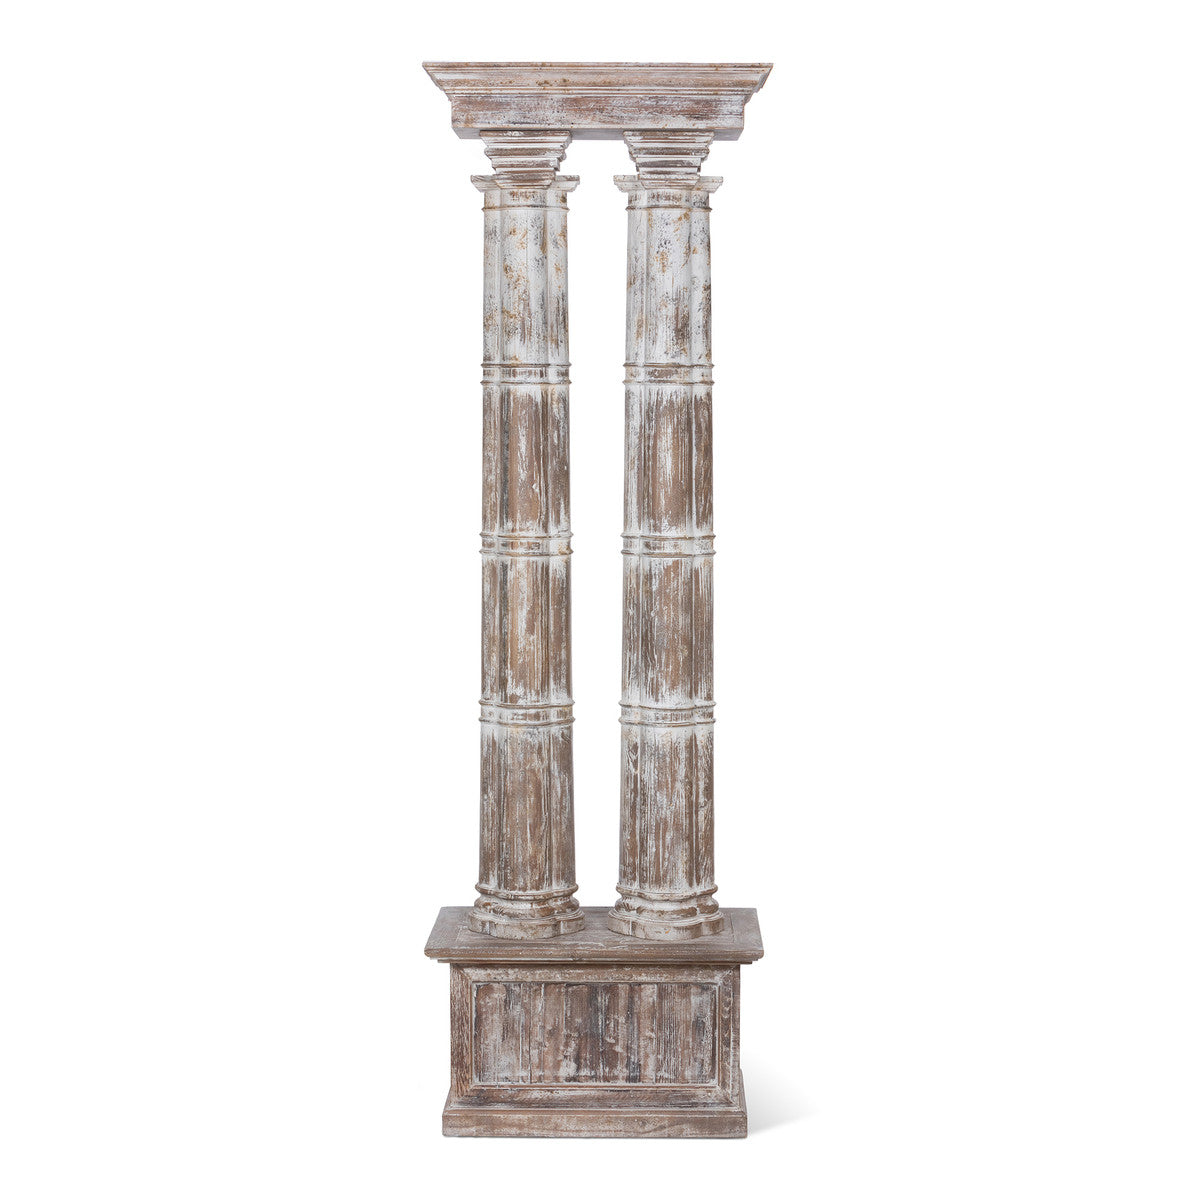 white washed wood double pillar architectural decor